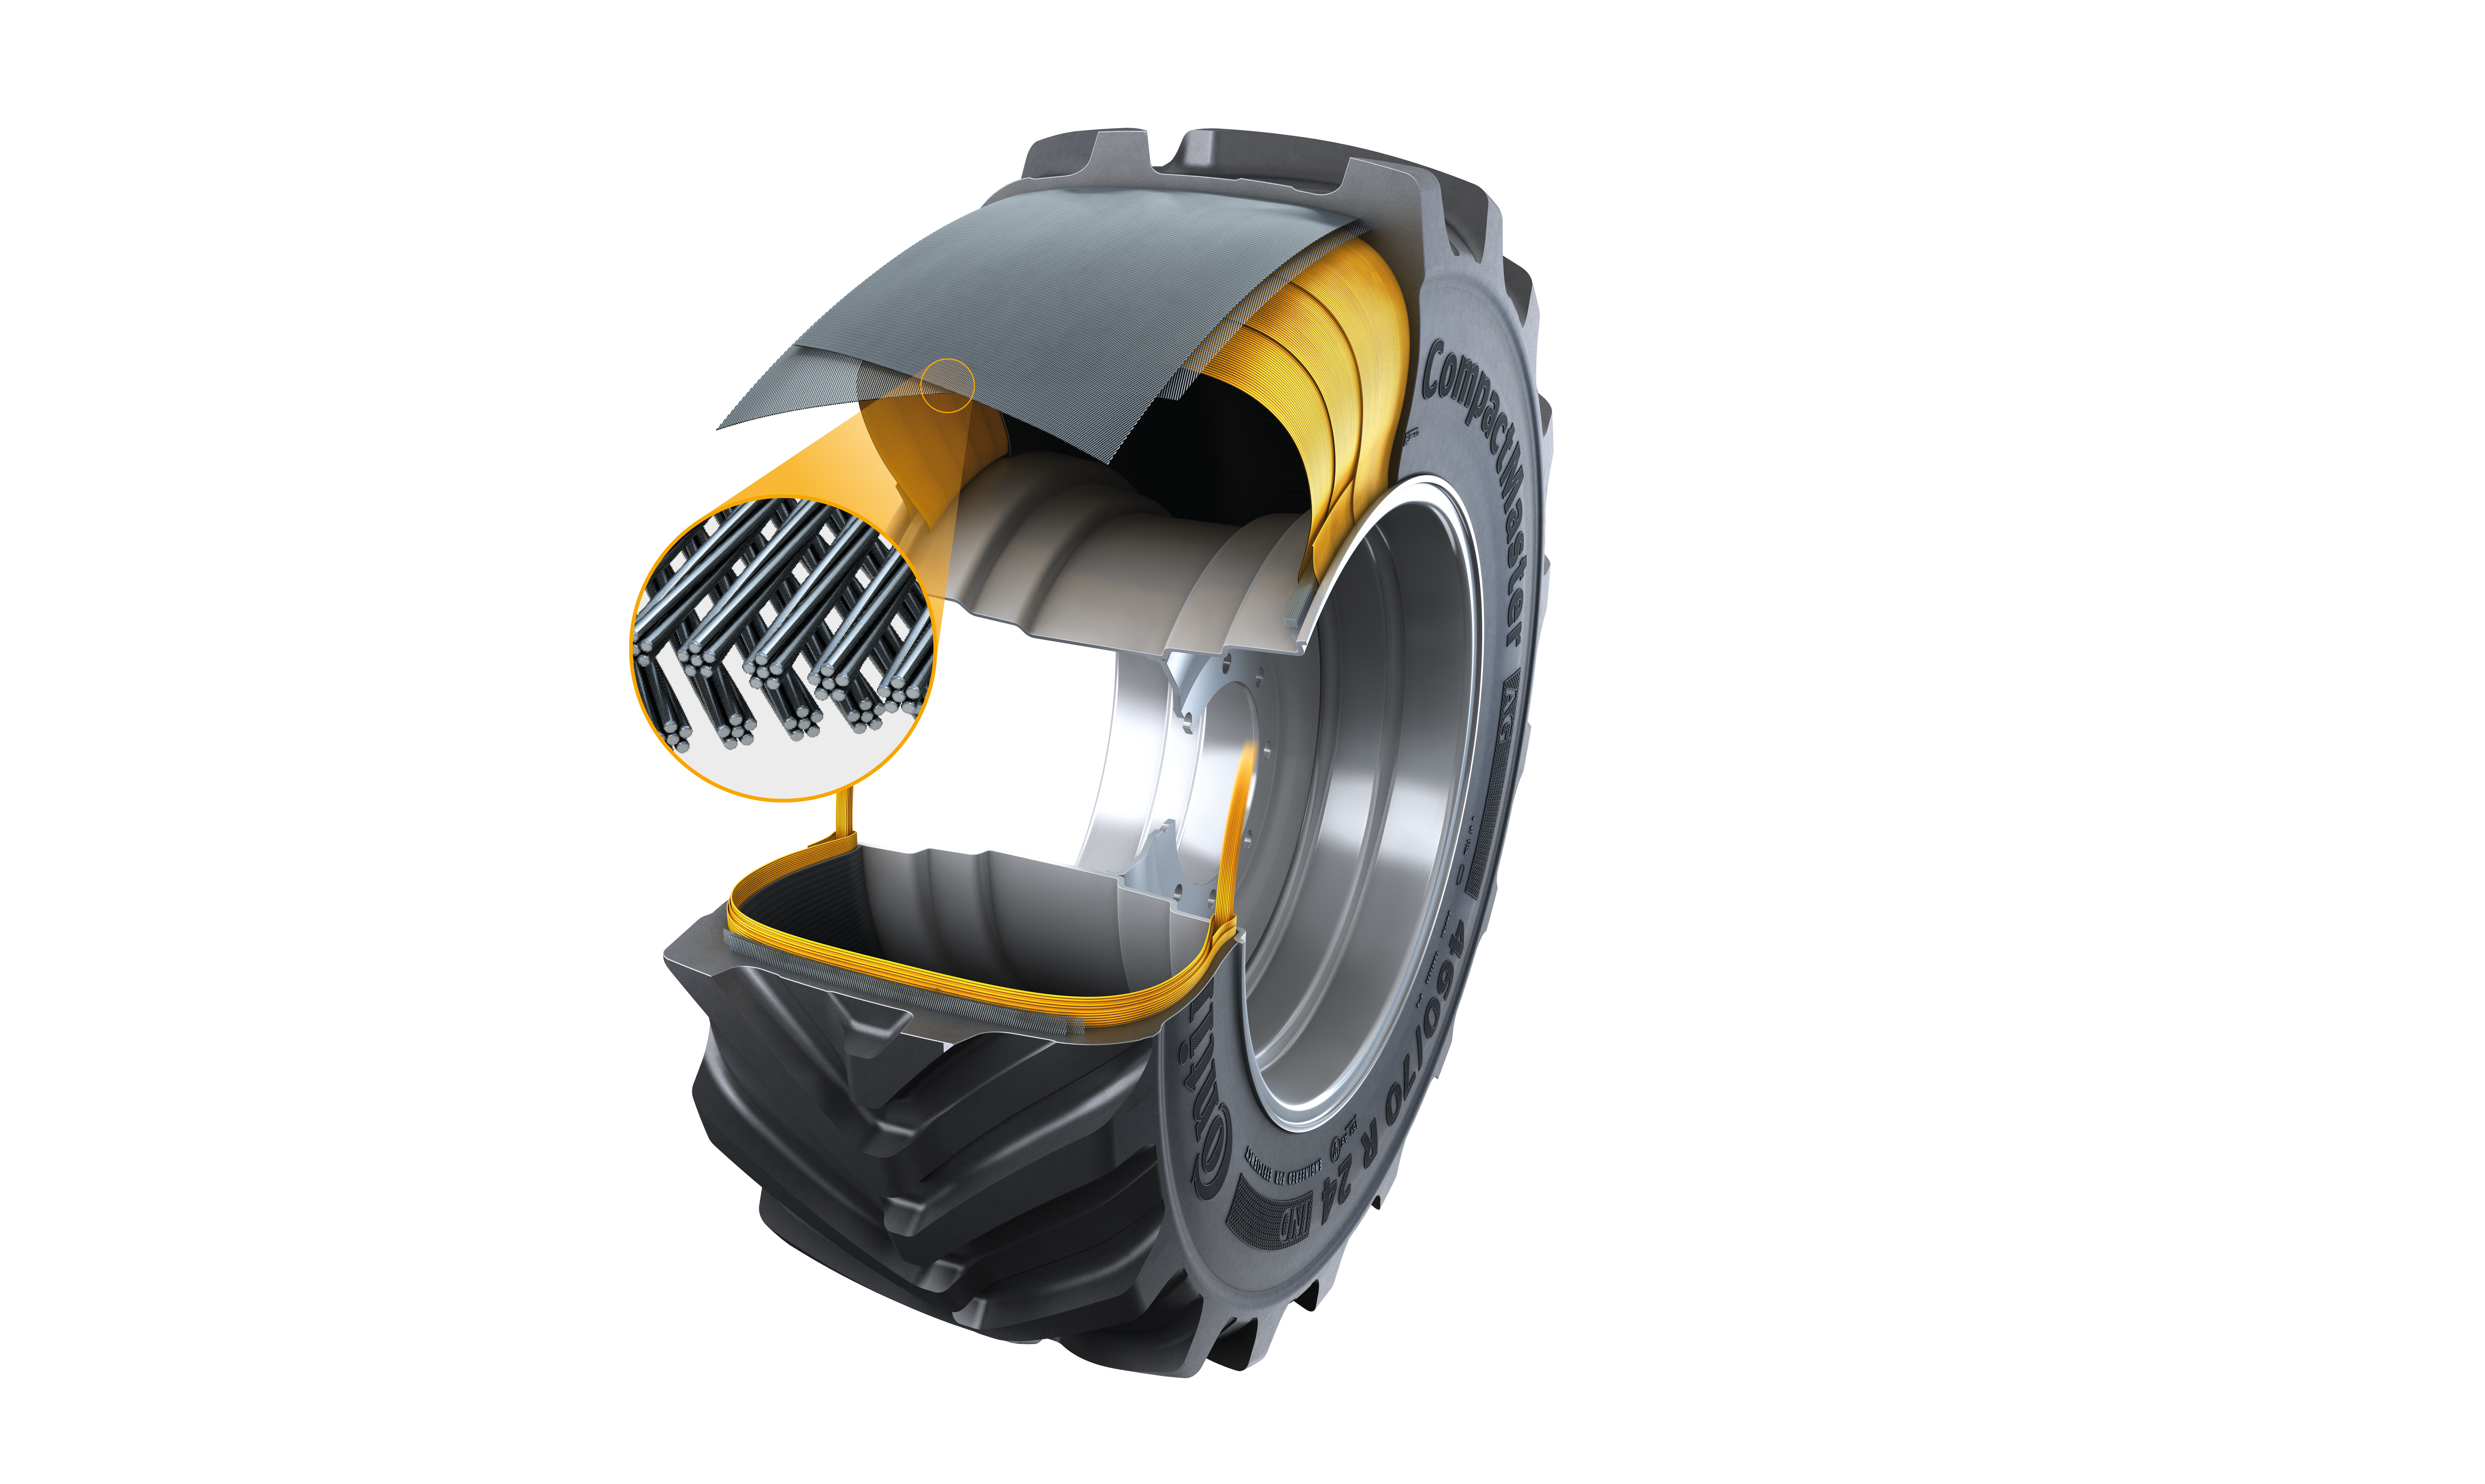 The new CompactMaster AG tire benefits from Turtle Shield, a new tread layer, and a steel belt construction which offers greater durability and stability for materials handling work. <br> Image source: Continental Reifen Deutschland GmbH 